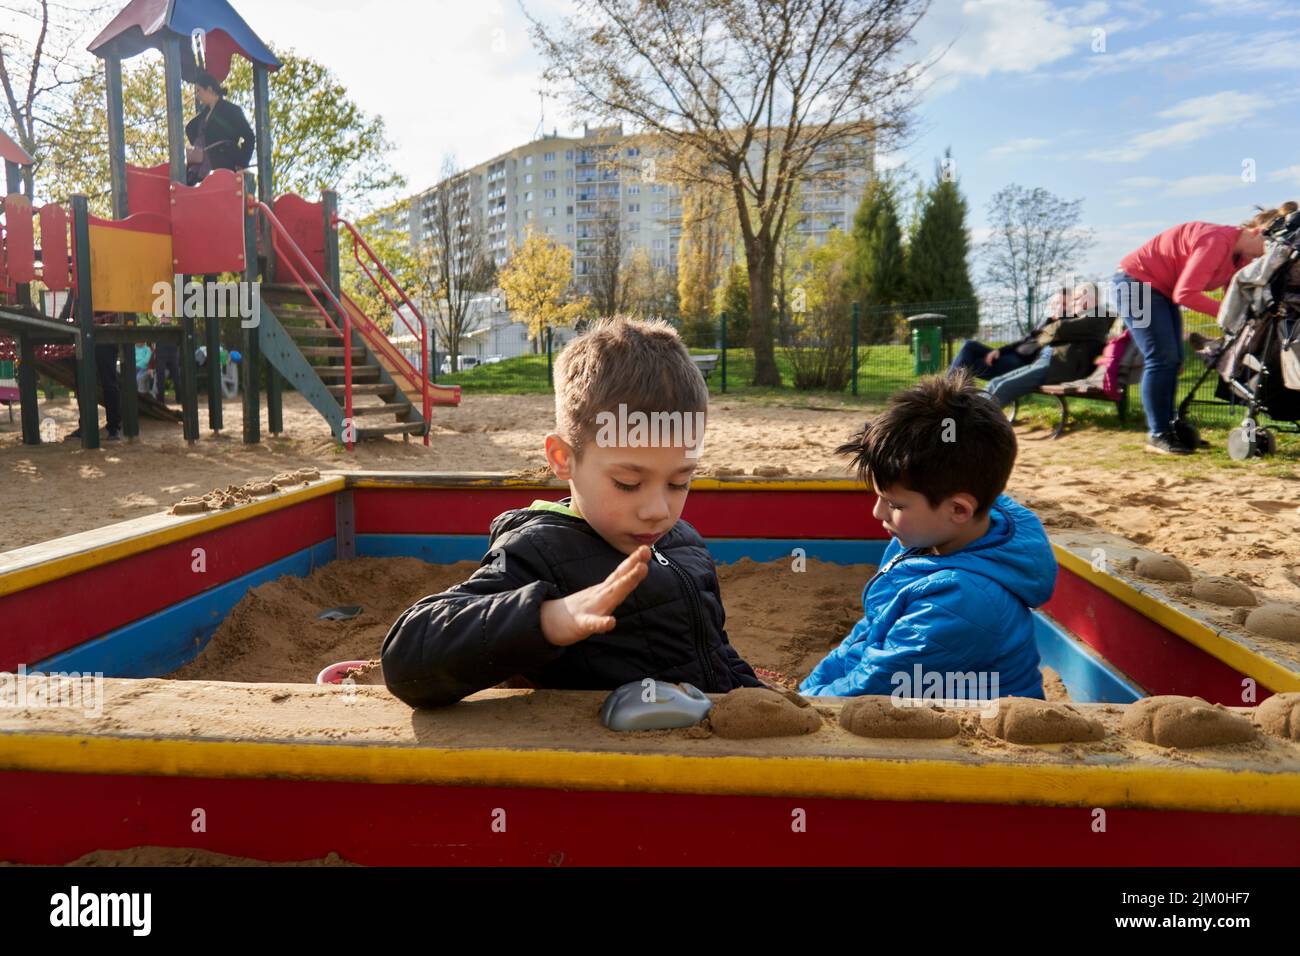 A view of two young boys playing with plastic toys in a sandpit at a playground Stock Photo